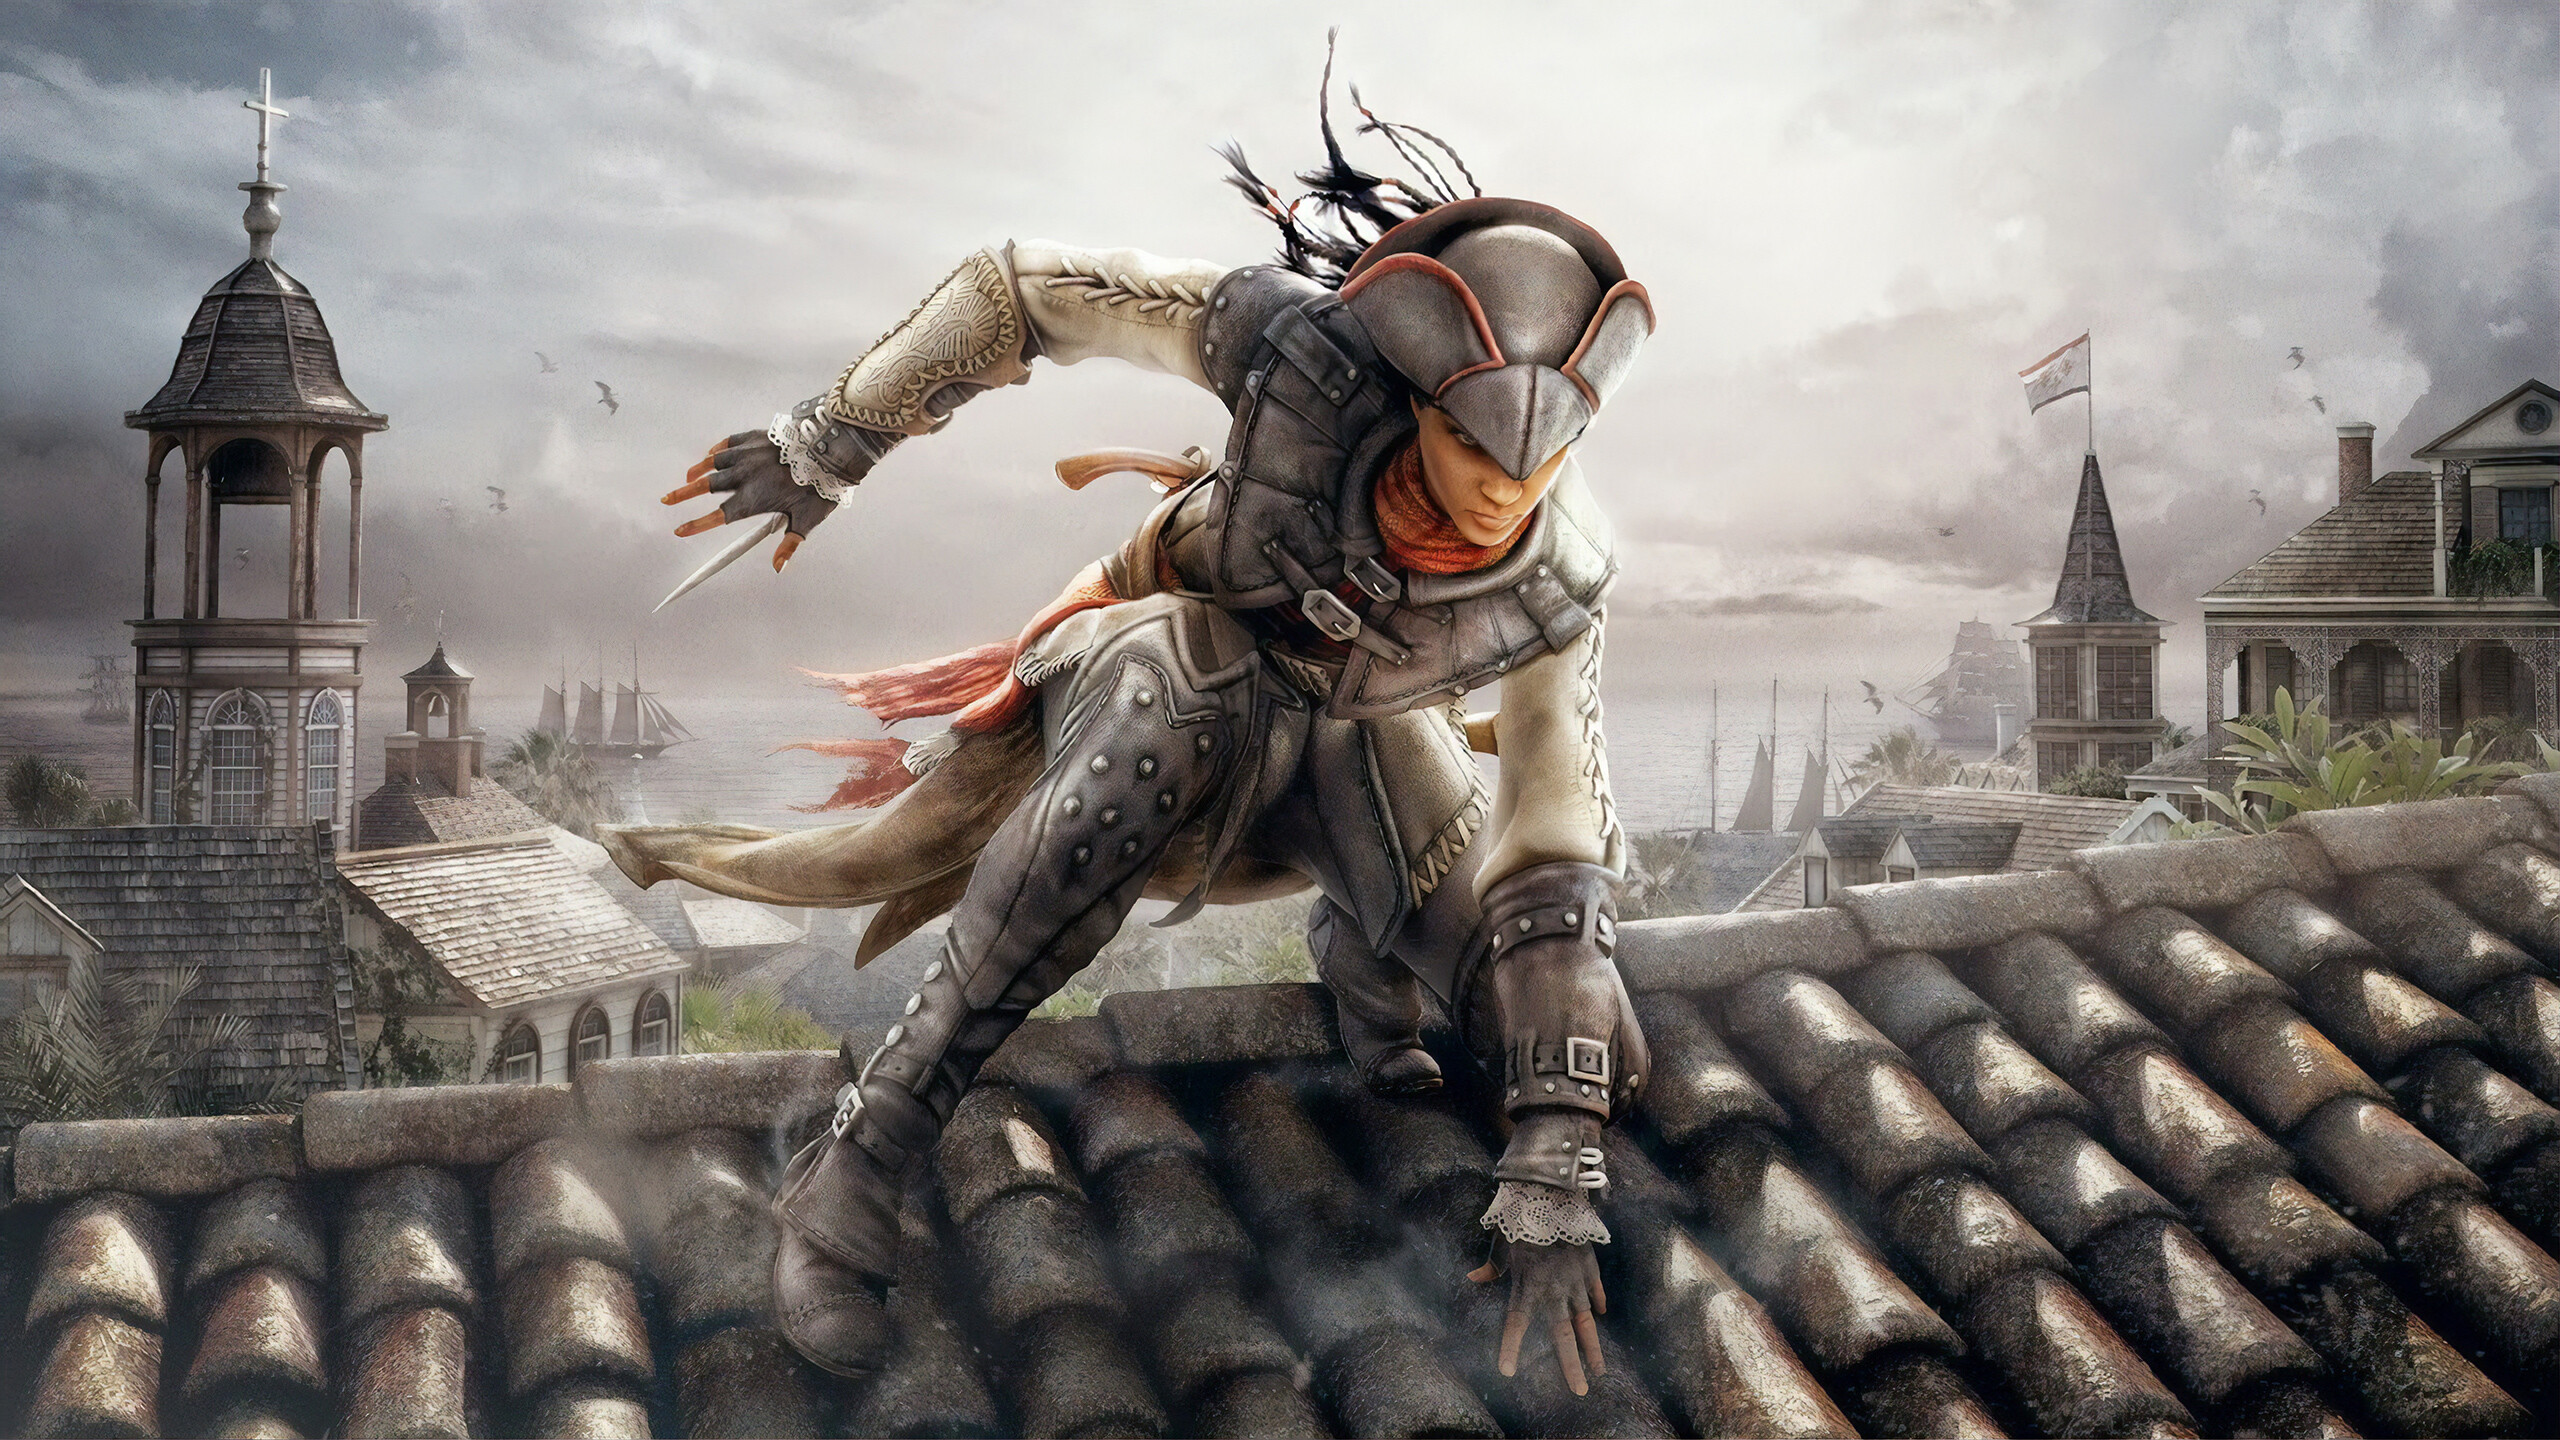 Assassin's Creed: Aveline de Grandpre, Appears as the protagonist of Liberation. 2560x1440 HD Background.